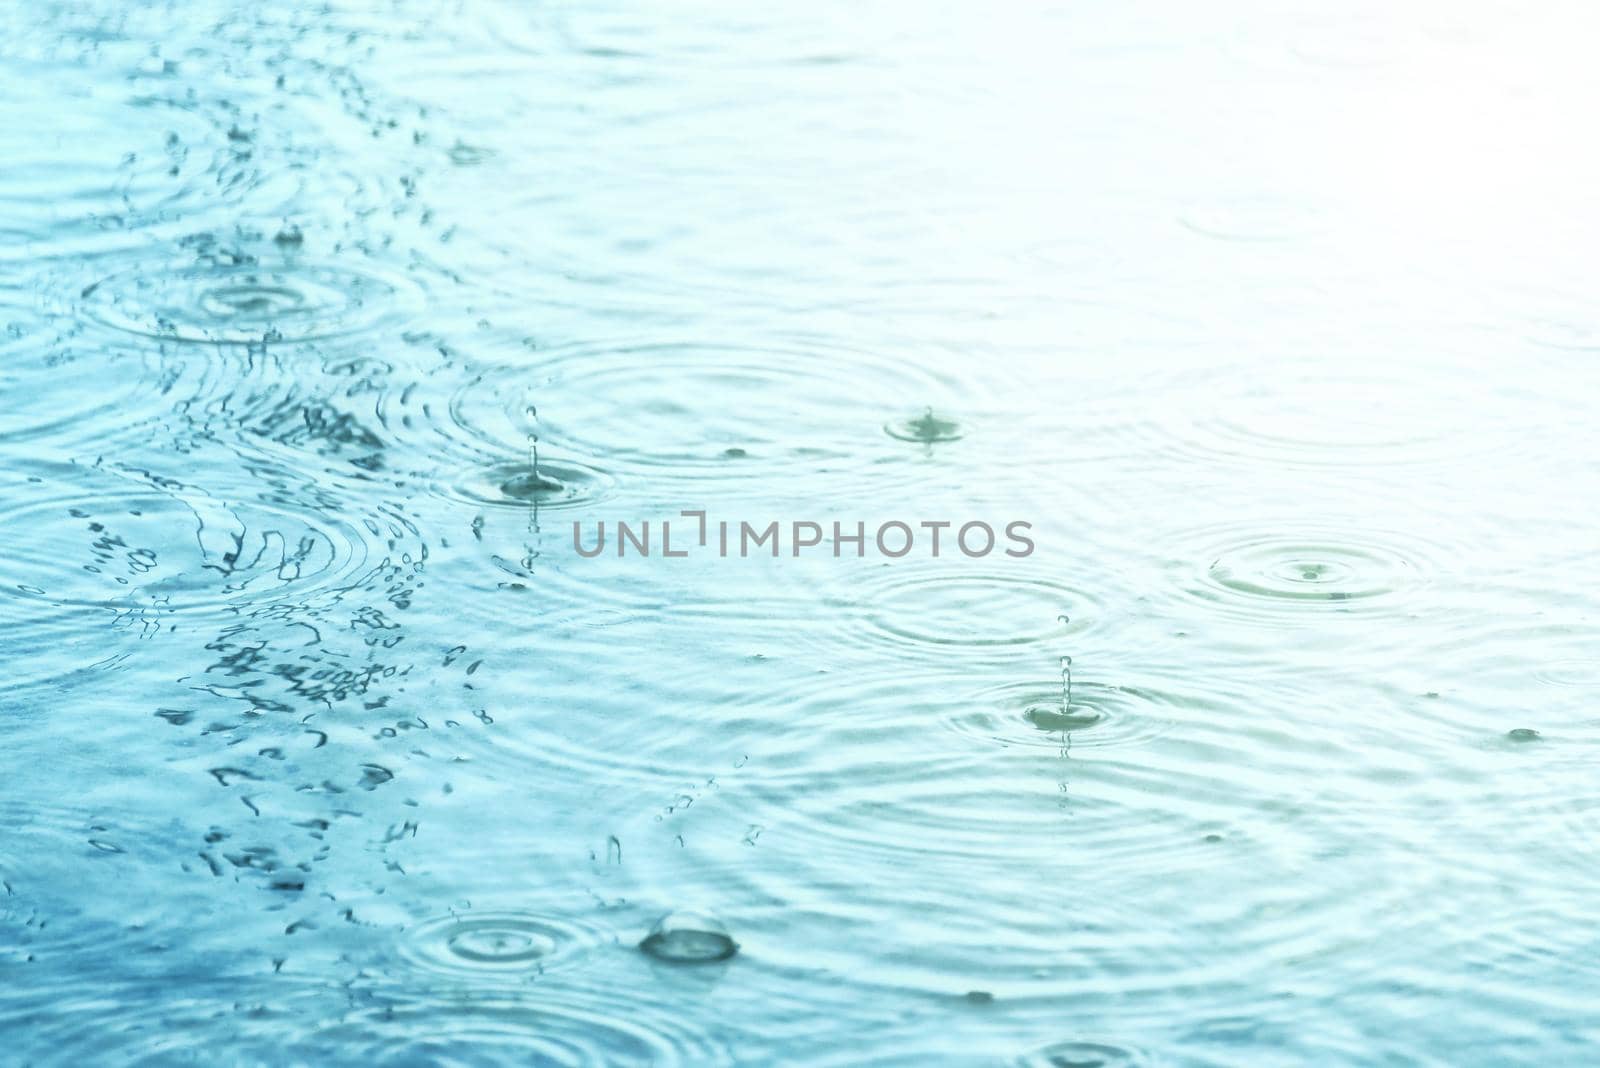 Raindrops creating concentric circles and droplets on a puddle water surface